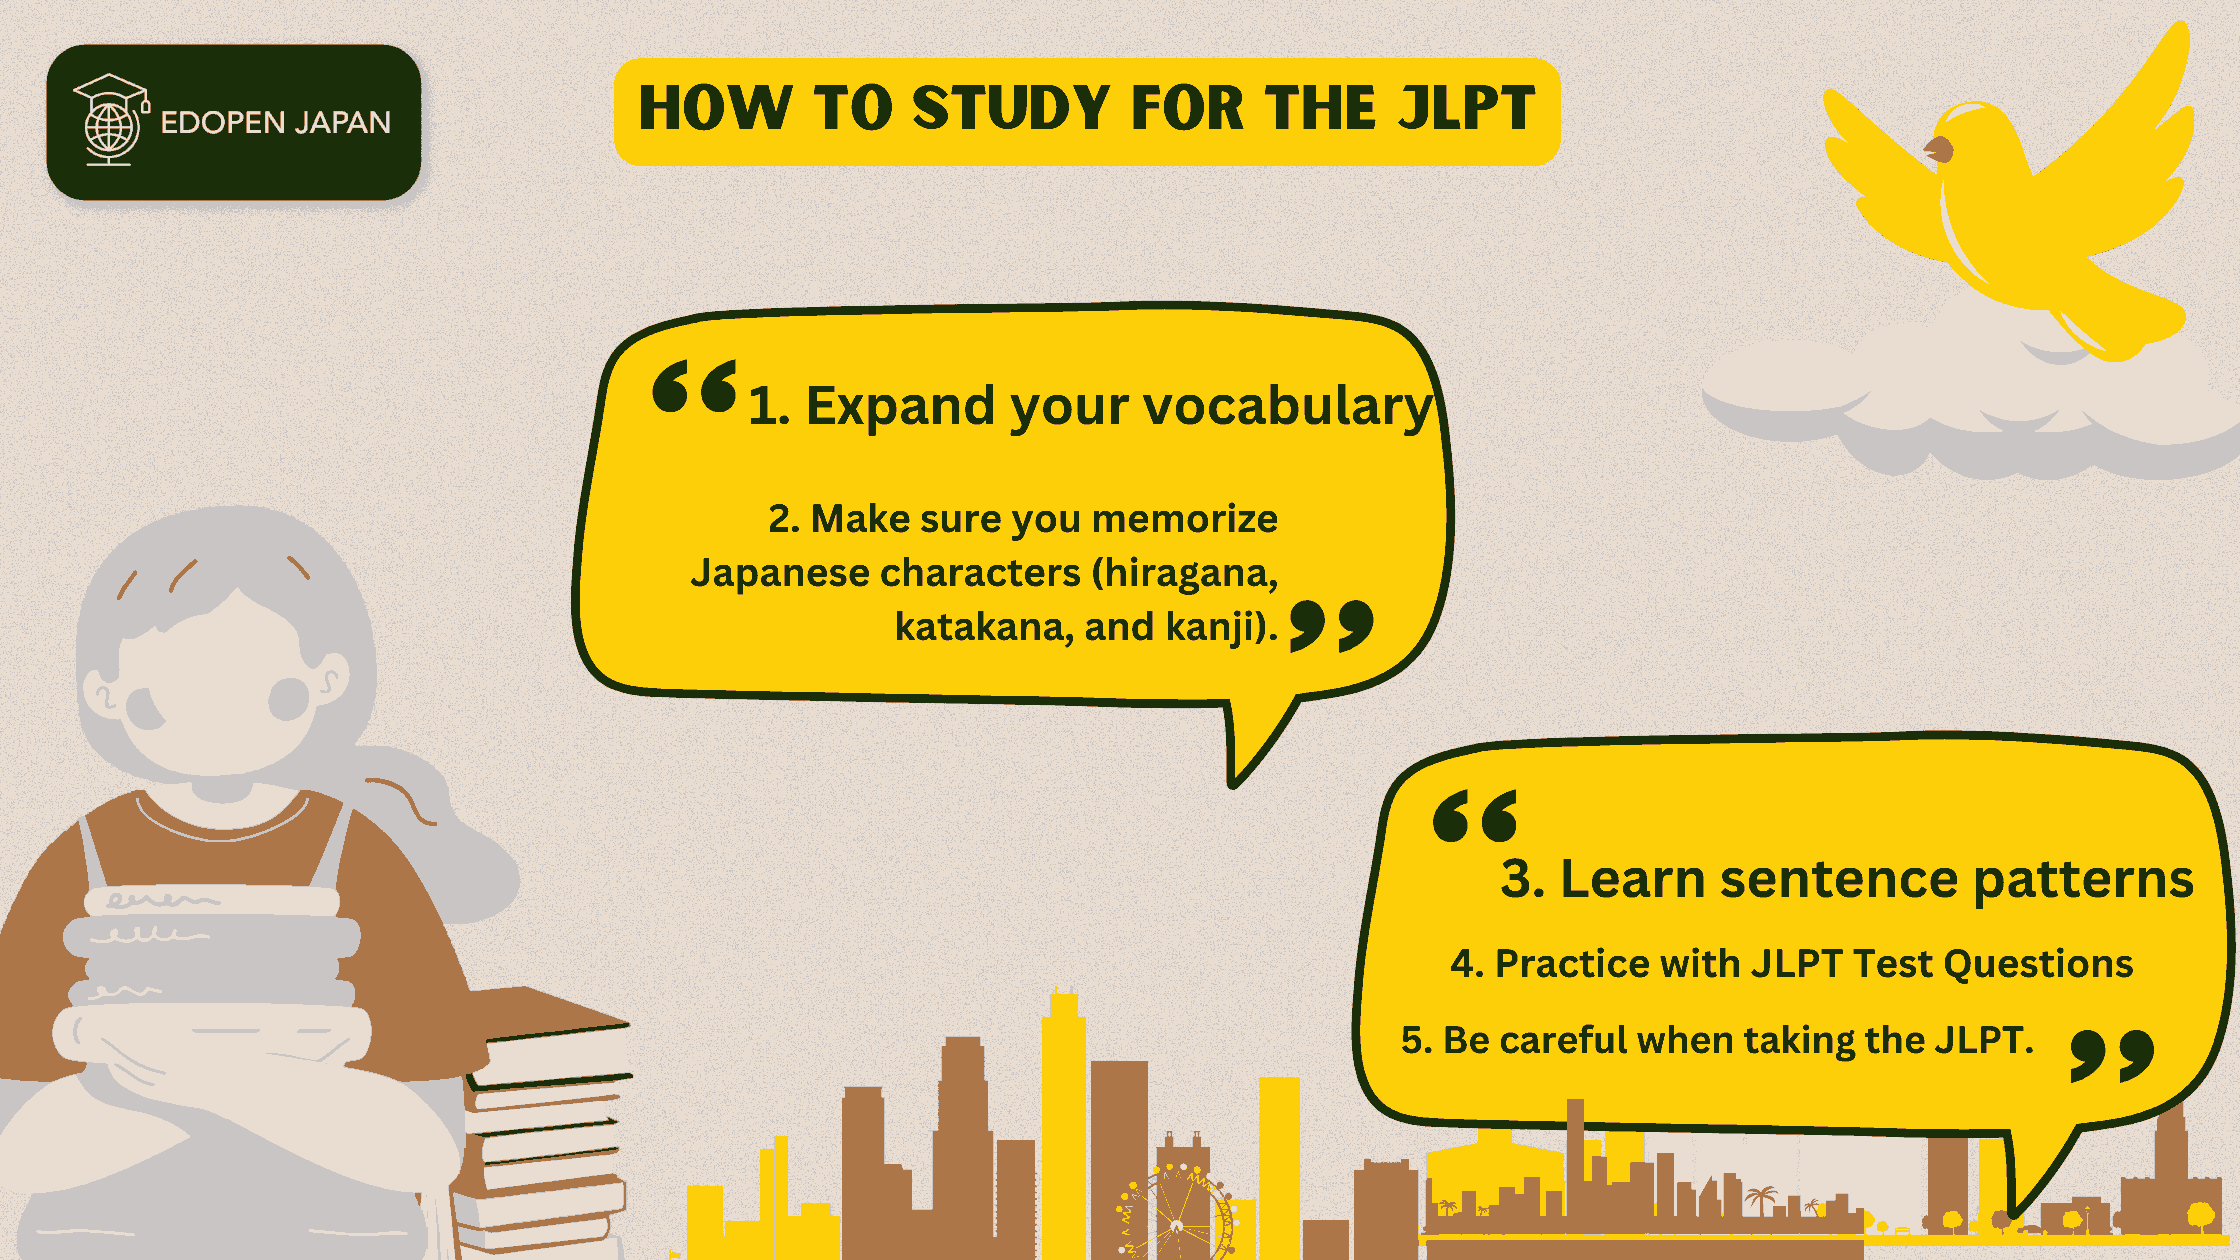 How to Study for the JLPT? - EDOPEN Japan